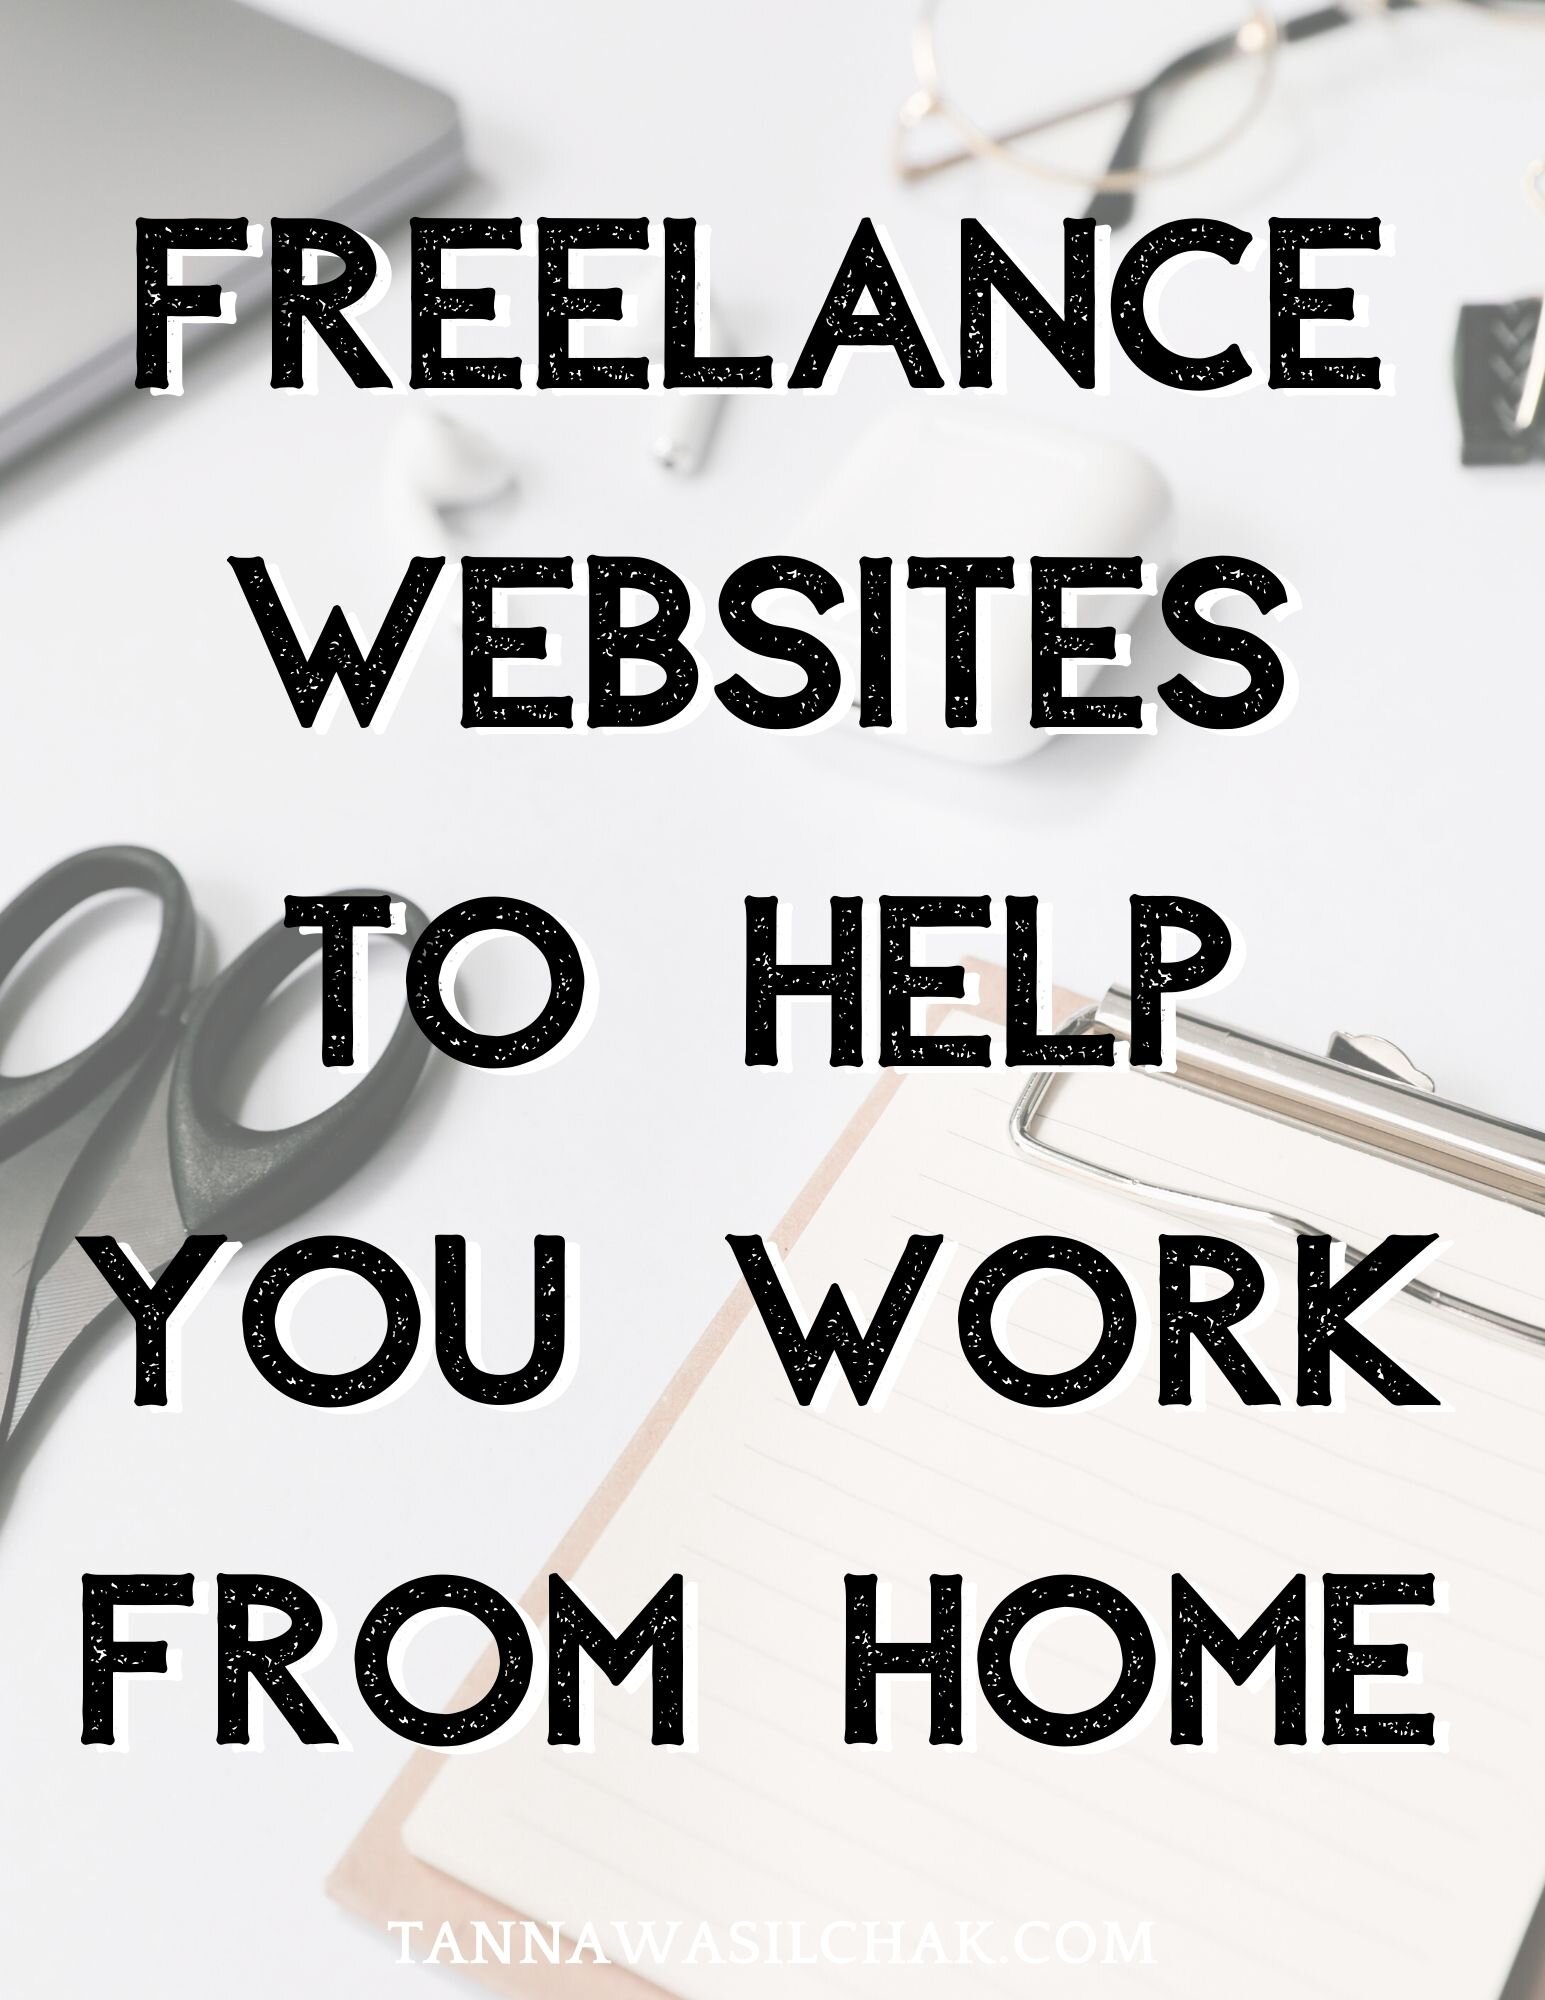 FREELANCE WEBSITES TO HELP YOU WORK FROM HOME.jpg